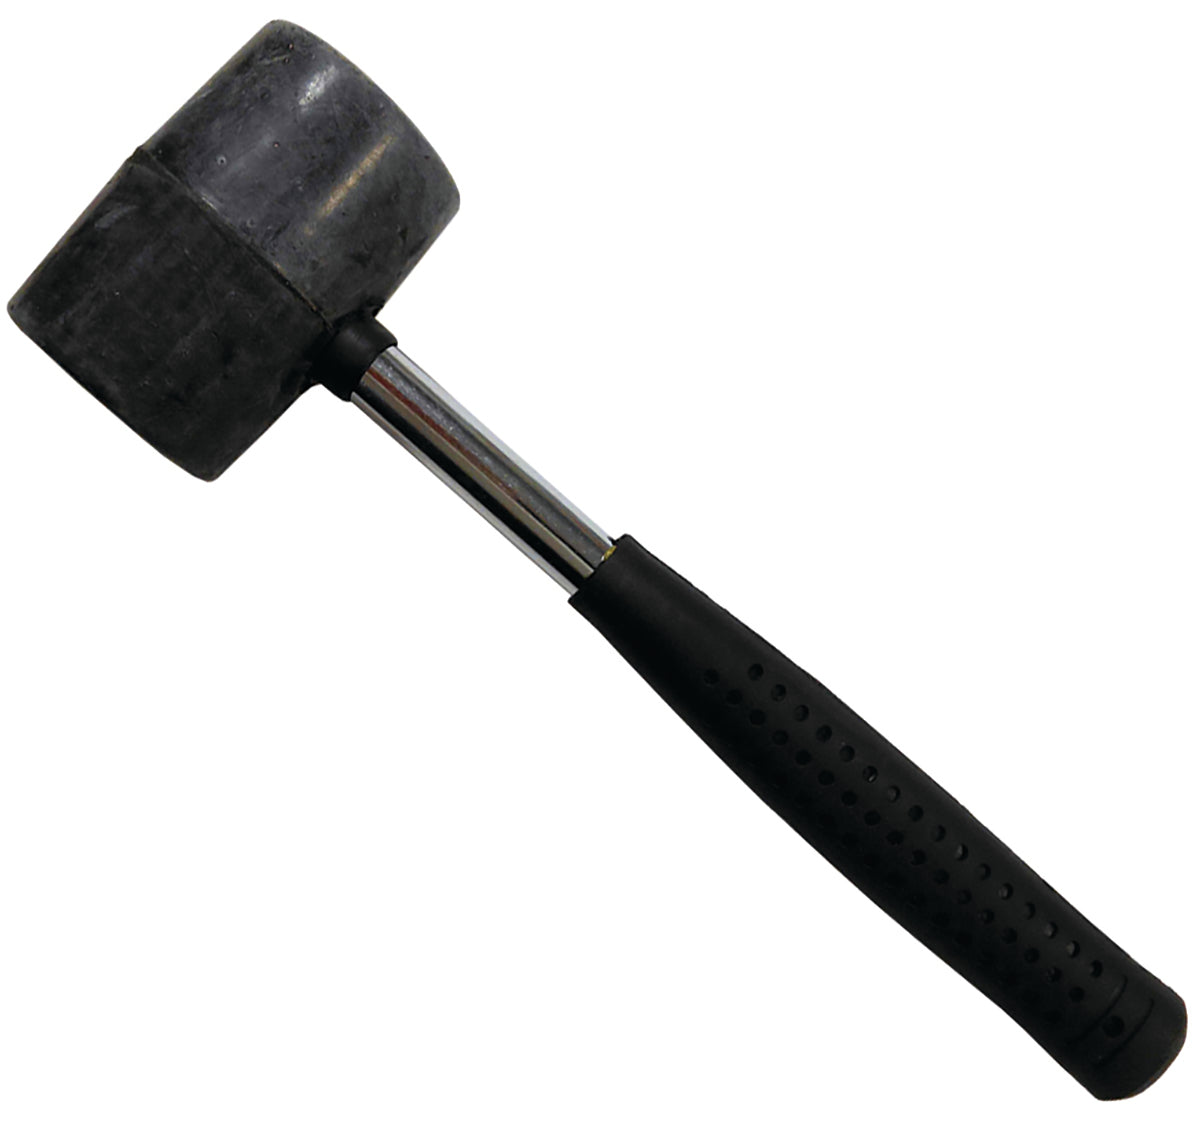 Rubber Mallet 8oz Tube Steel Handle with Grip